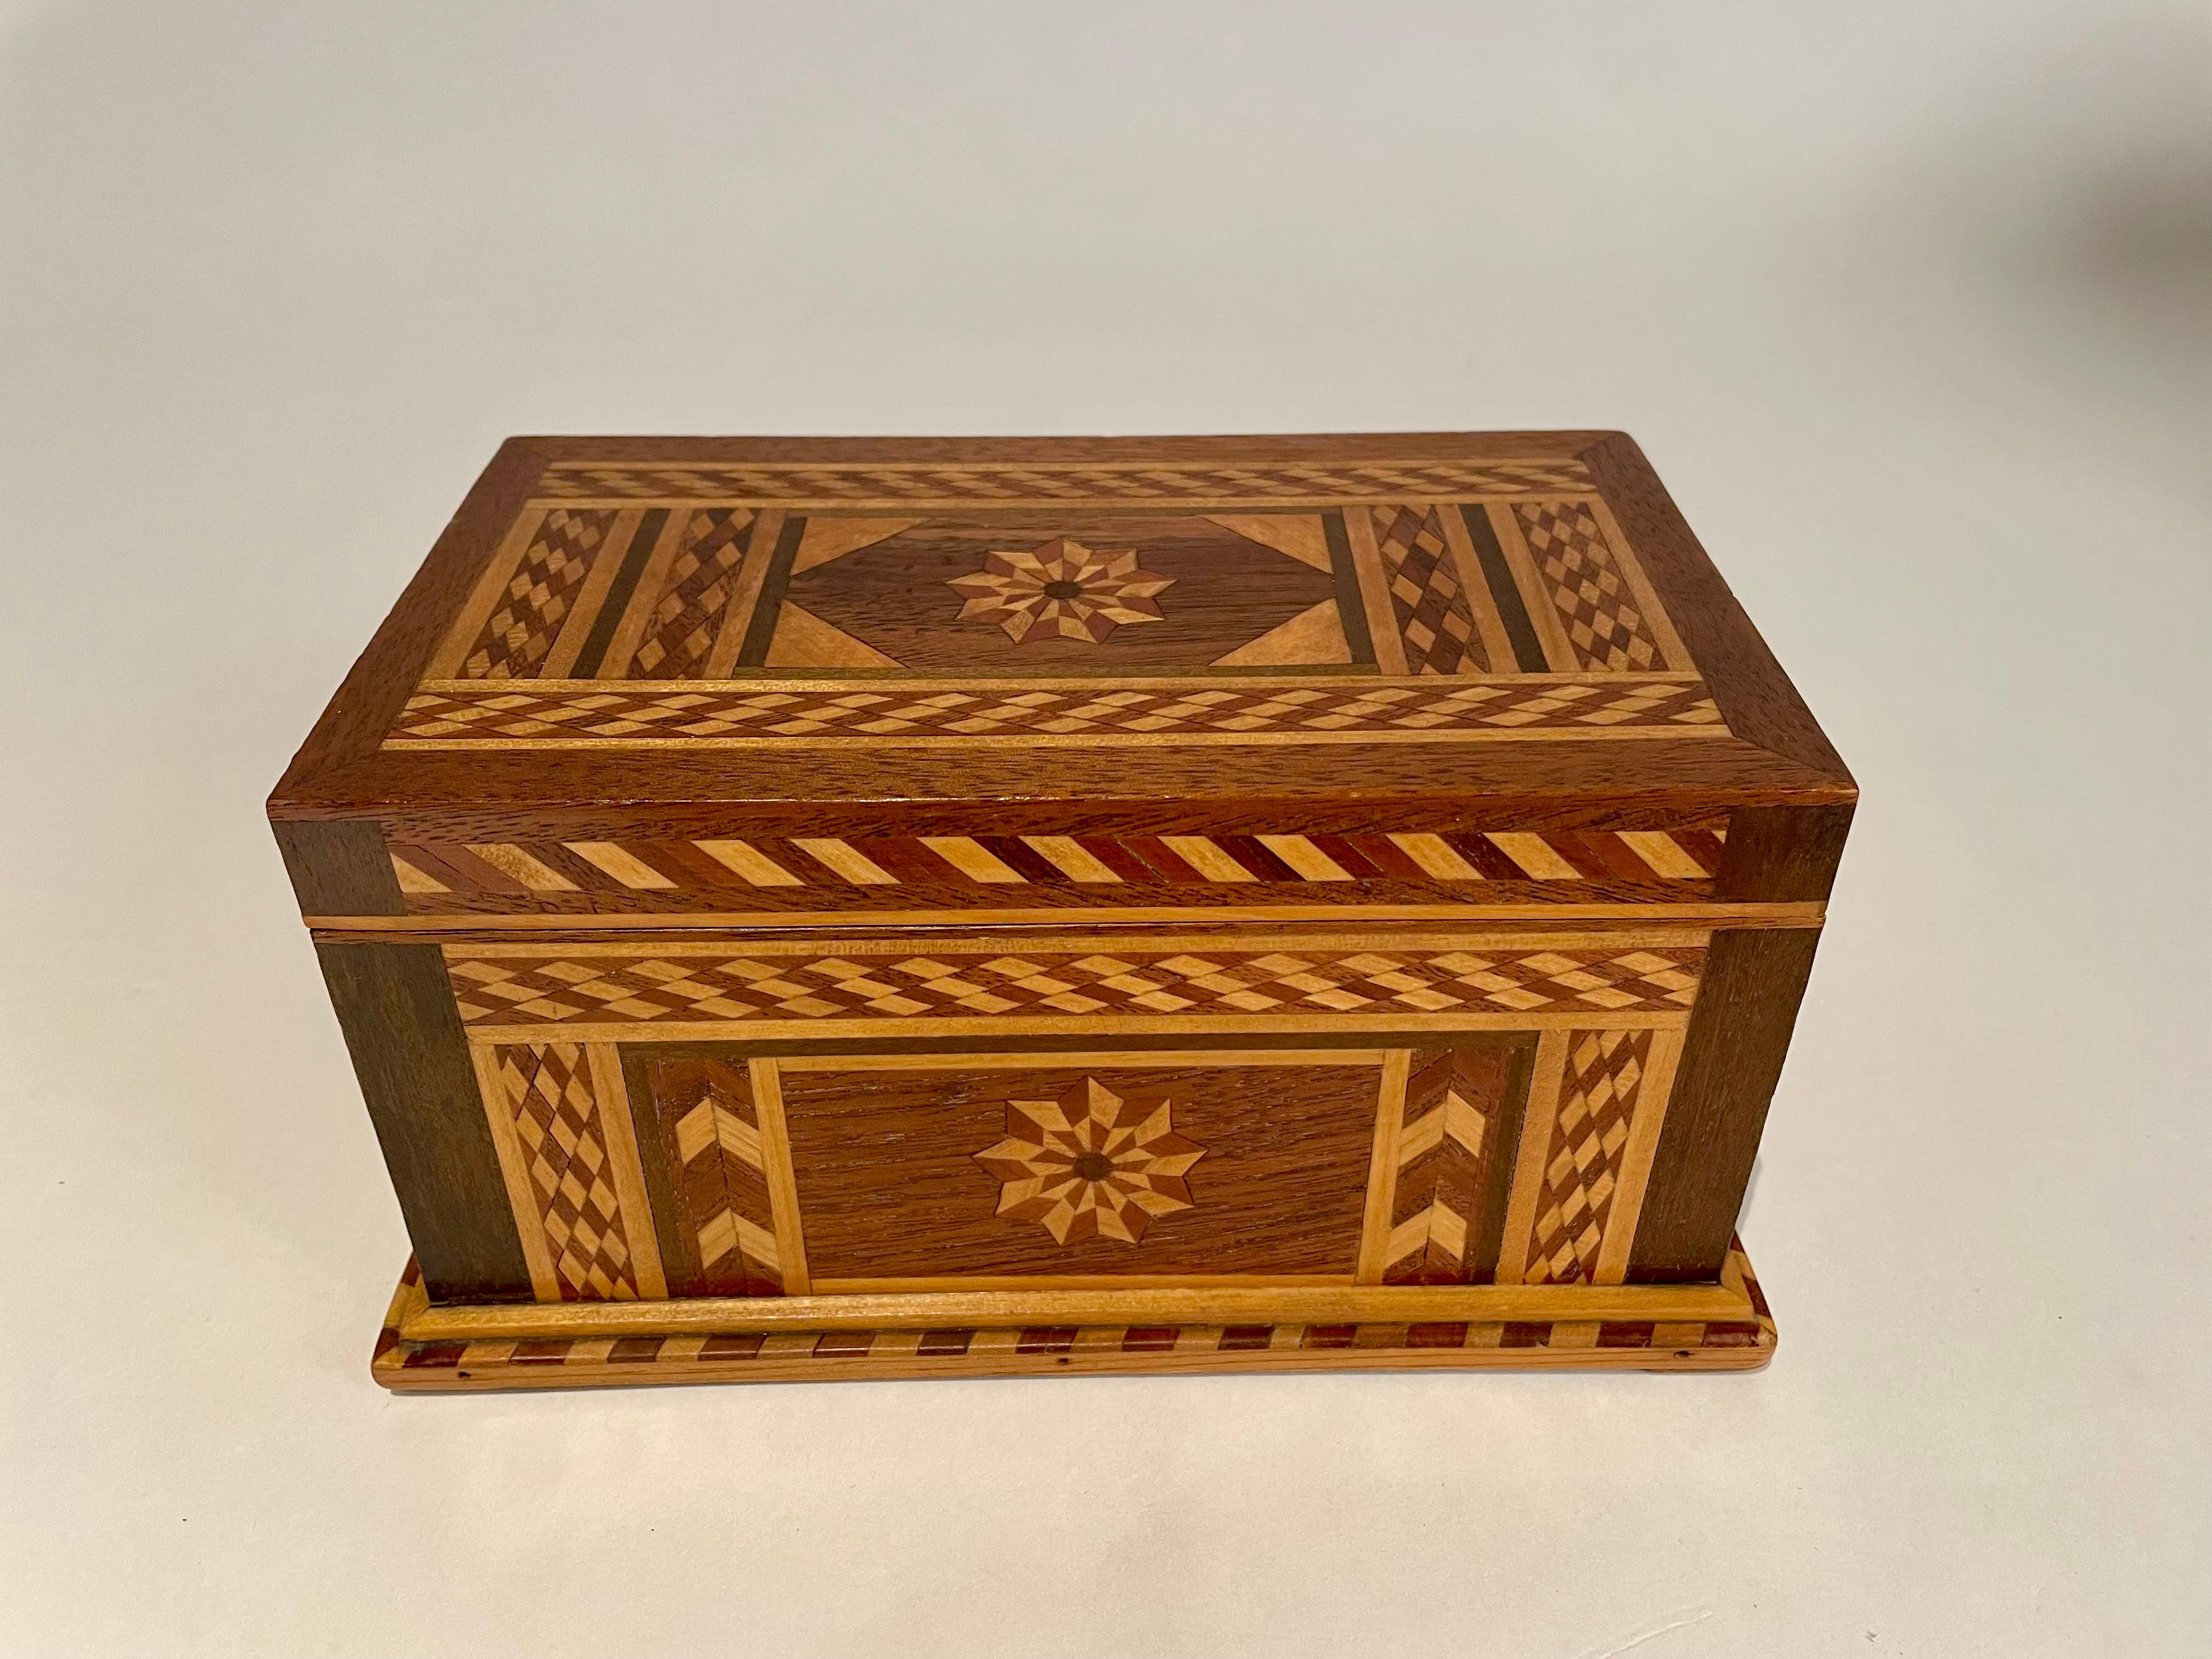 Hand-Crafted 19th C American Walnut Box With Geometric And Starburst Fruitwood Inlay